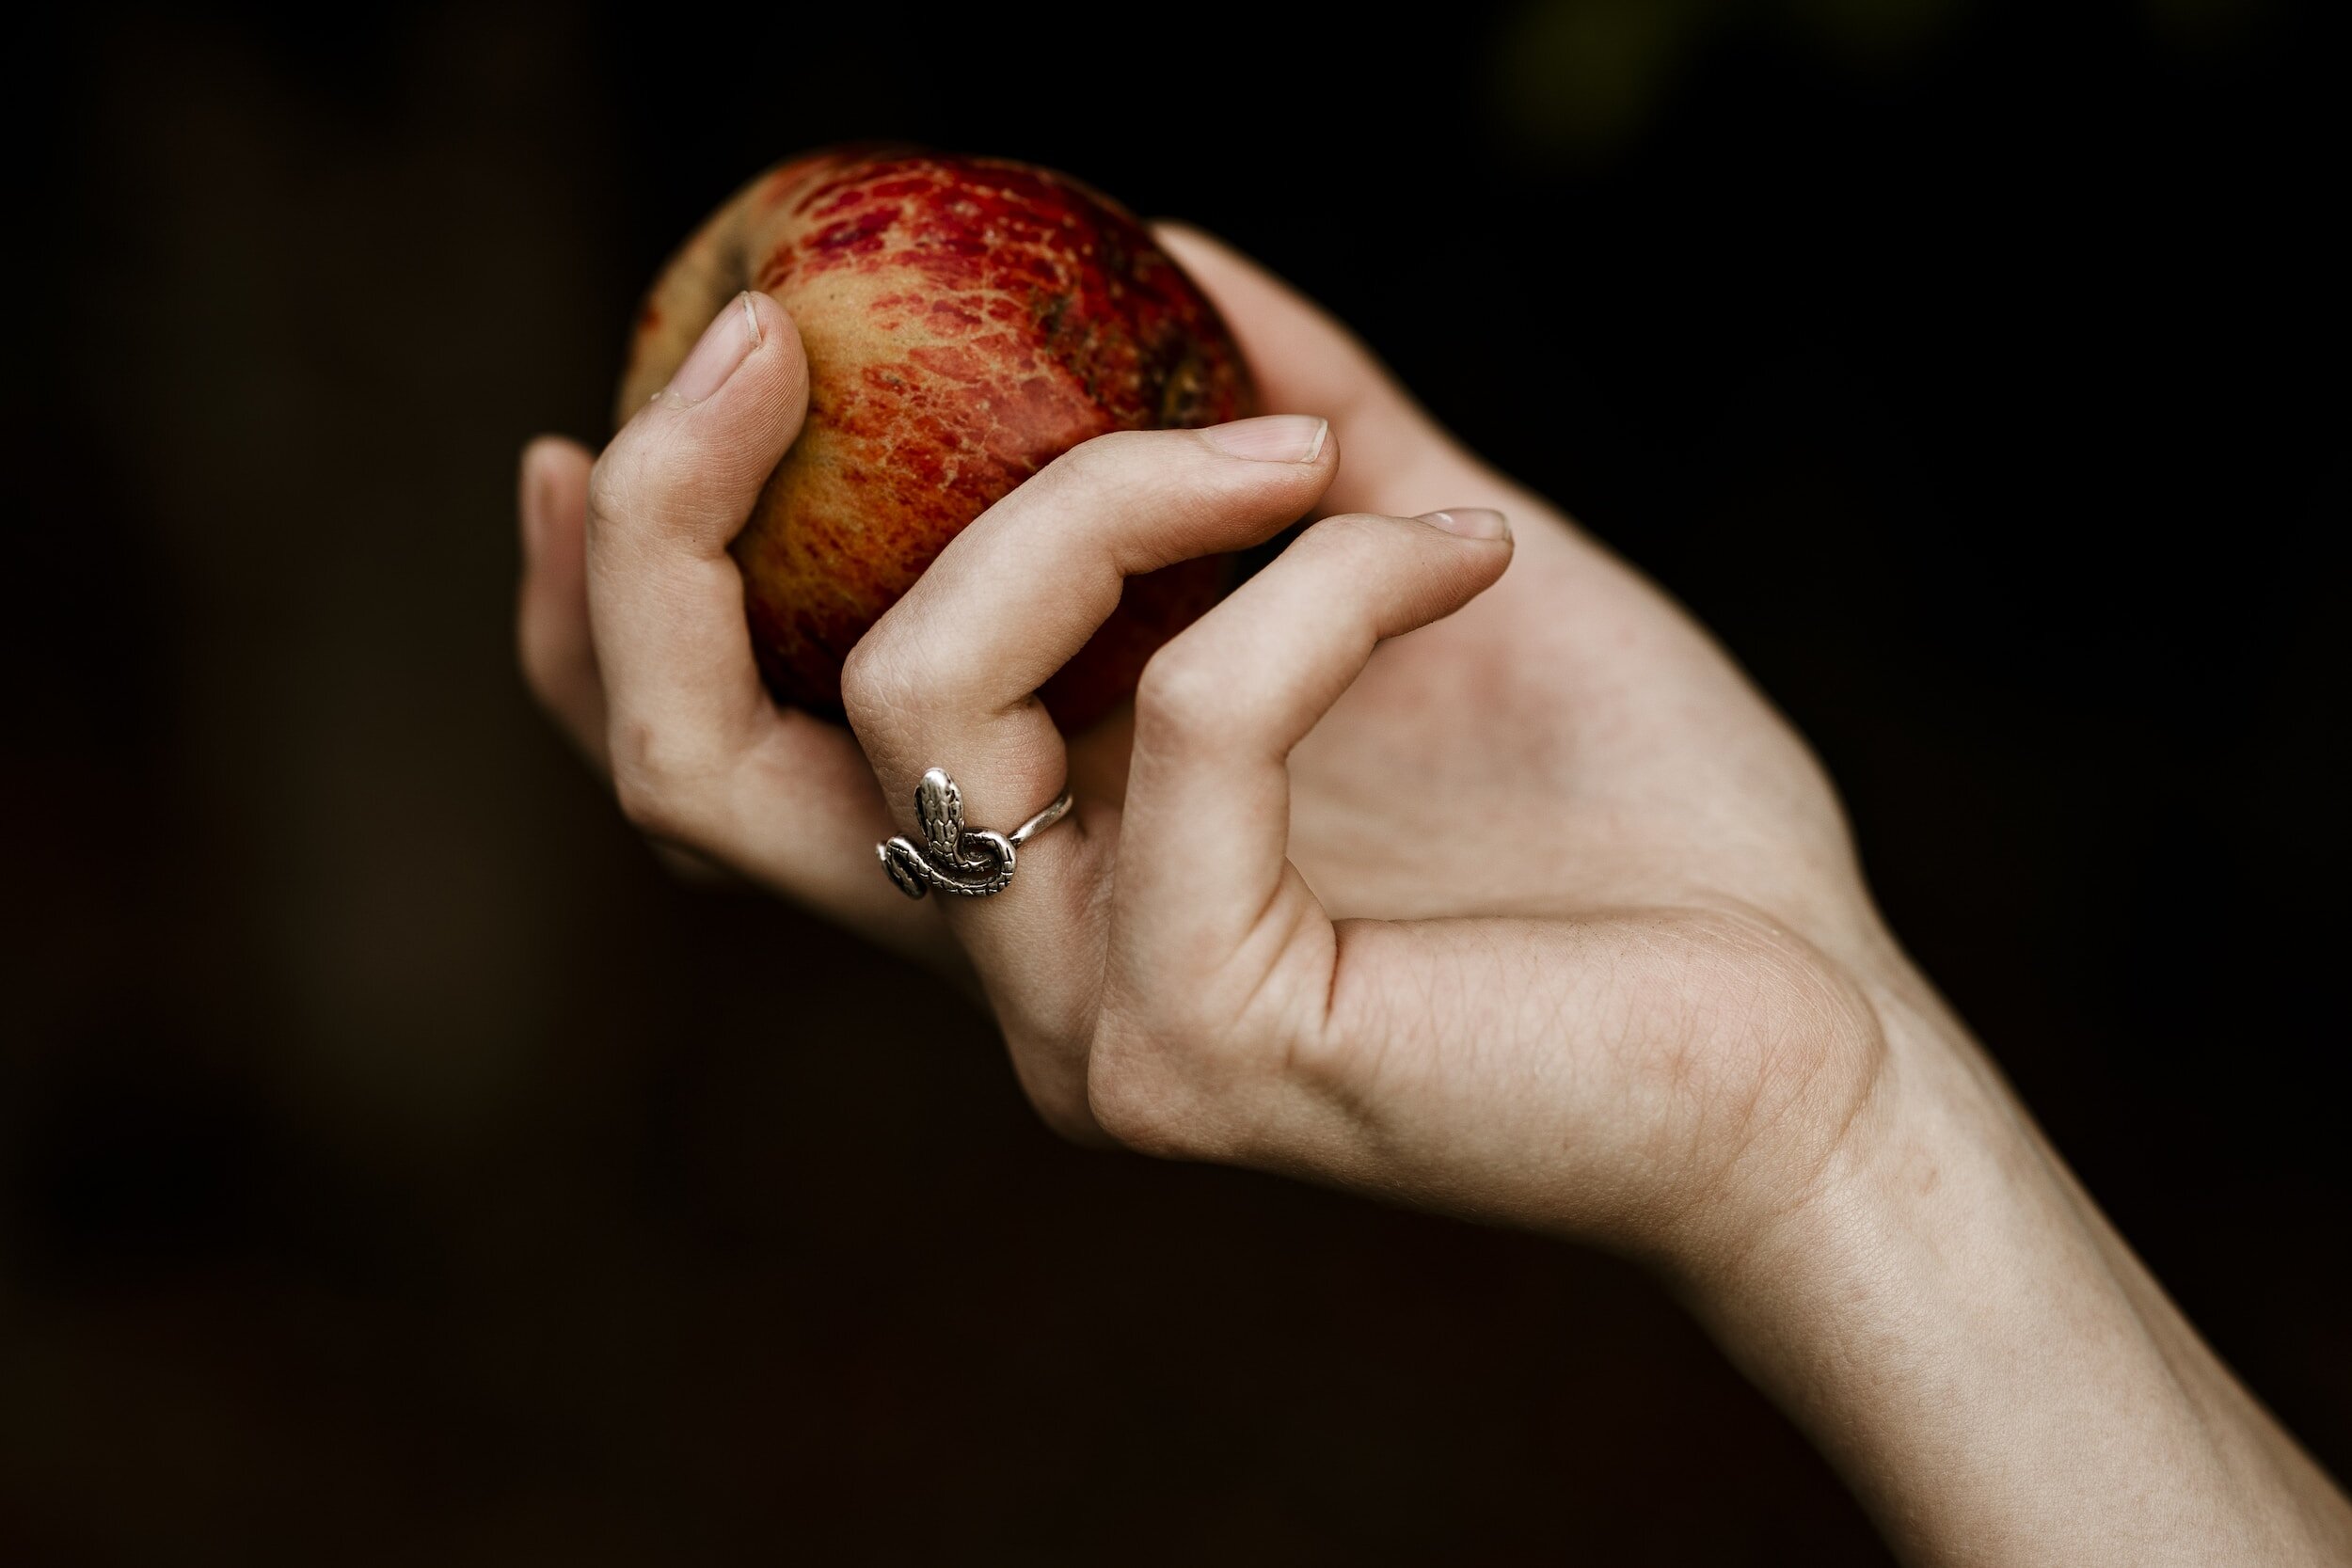 Eve and the Apple – Genesis 3